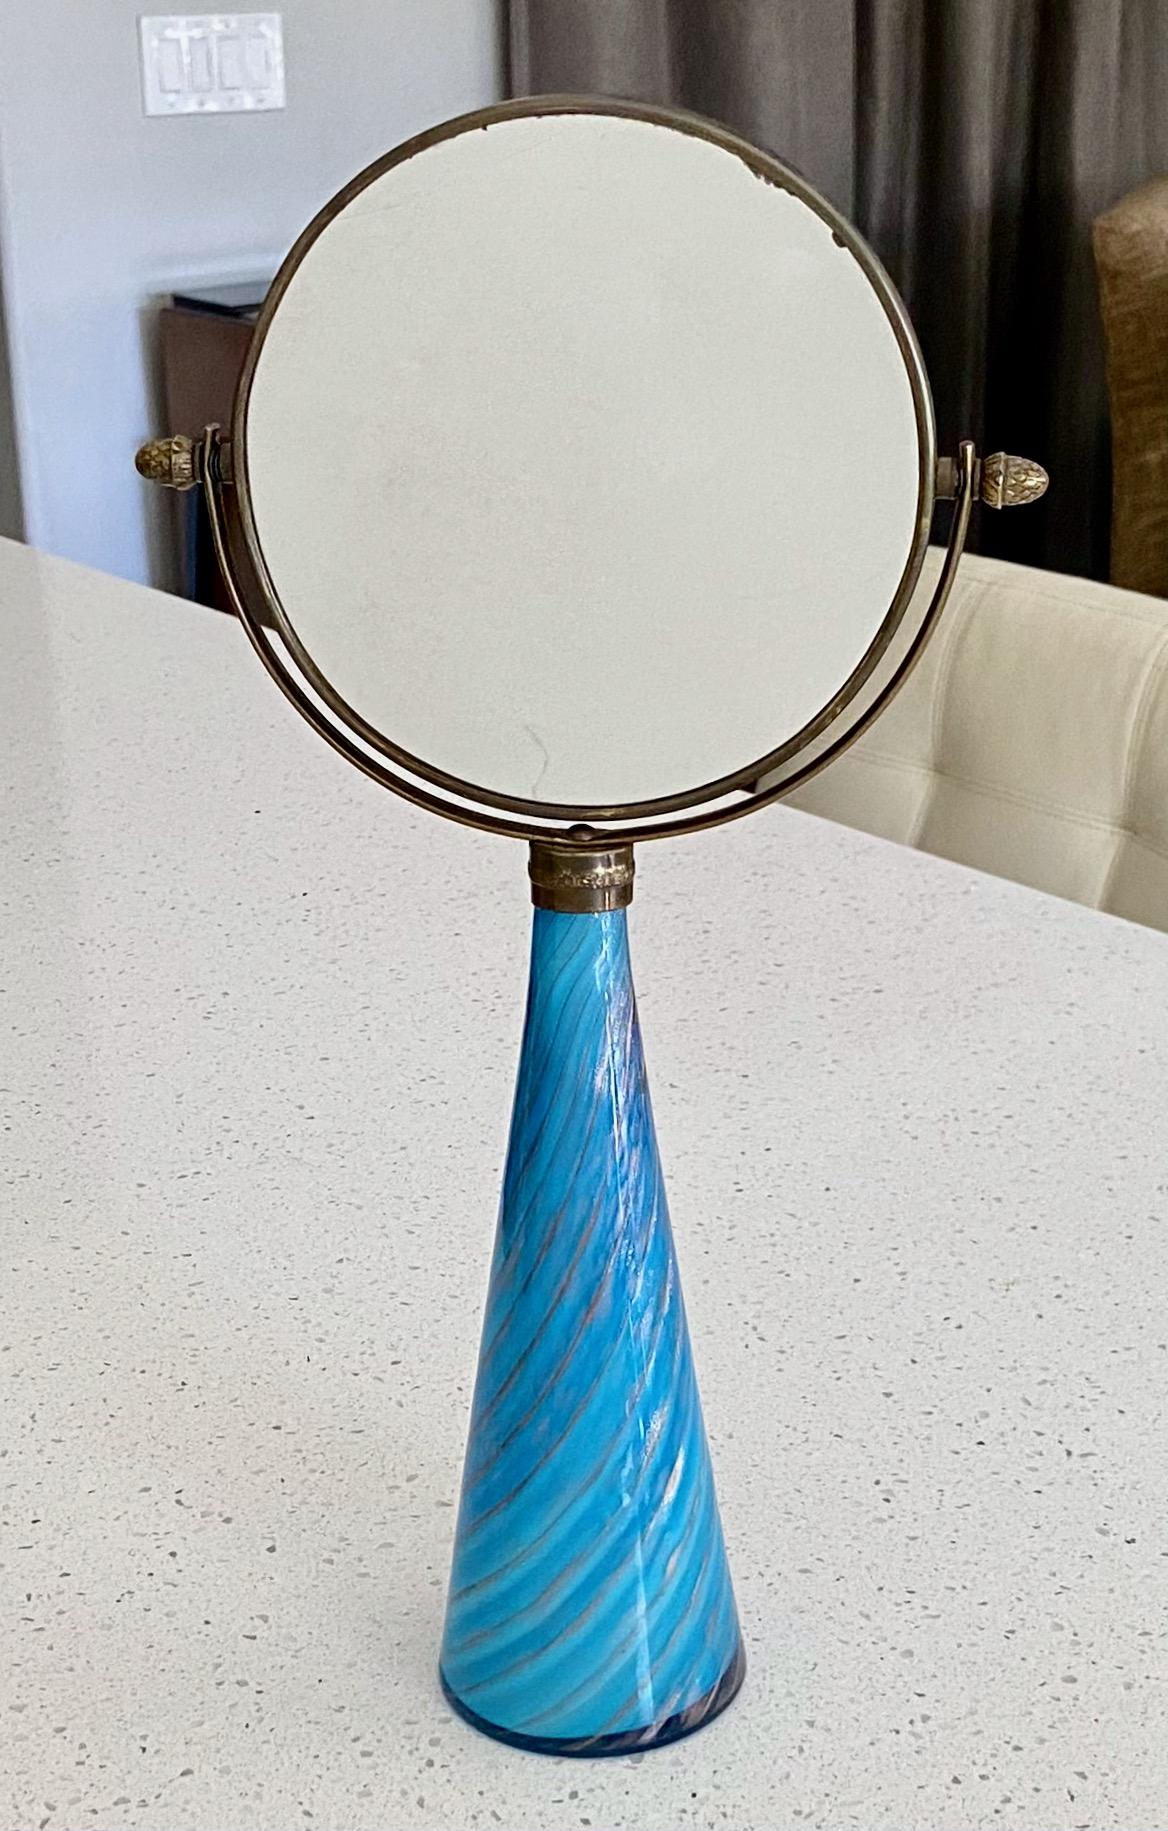 Smaller scale Murano vanity table mirror with cone shape blue and aventurine gold stripe hand blown glass base, top is a round 2 sided swivel brass mirror. The brass has a nice warm aged patina. The mirror portion is 5